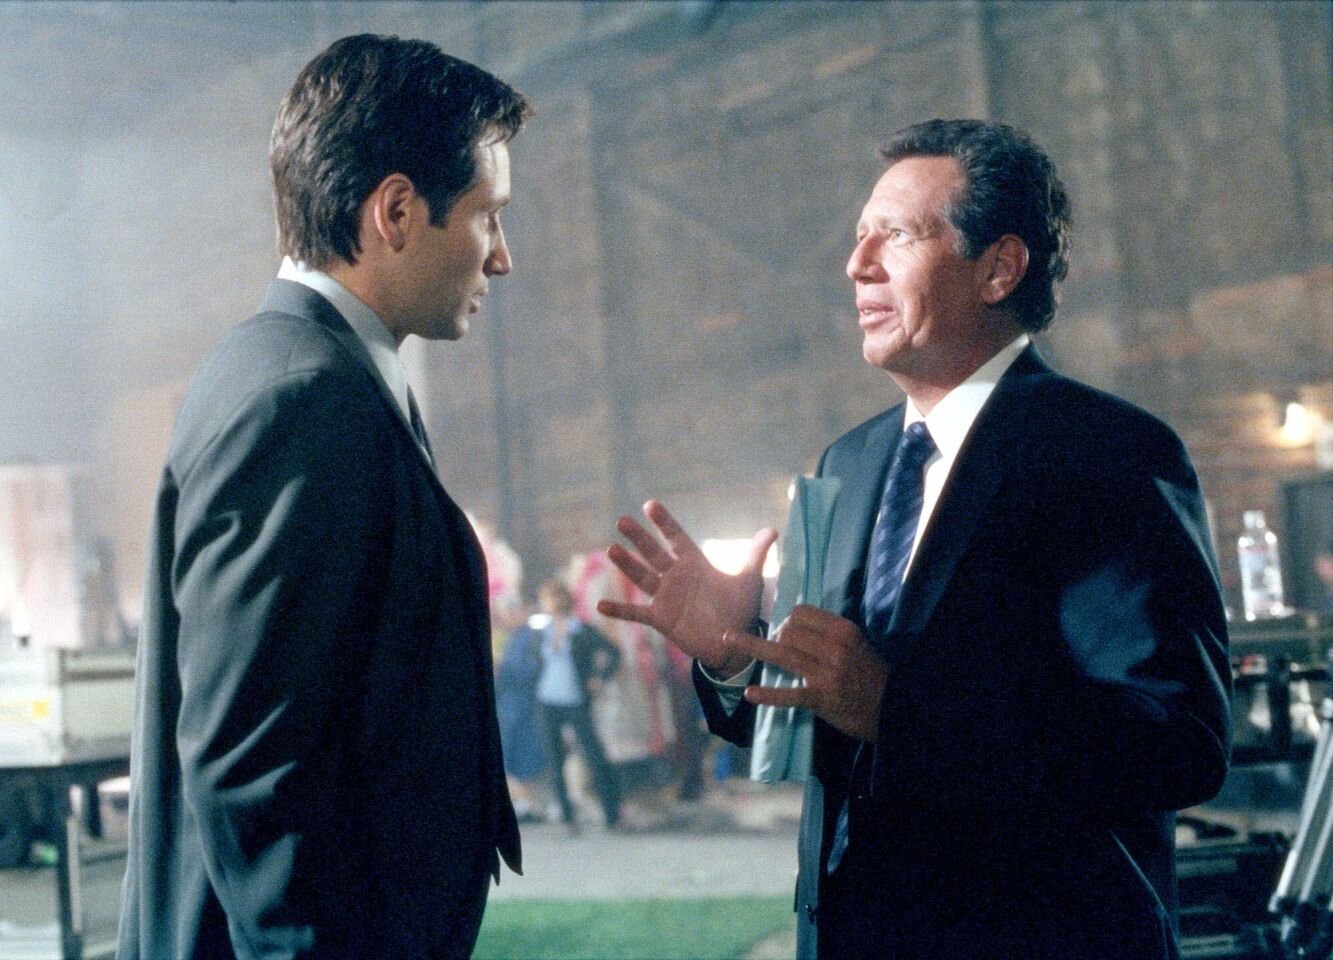 Shandling, right, continued his collaborations with Duchovny when he guest-starred in a 2000 episode of "The X-Files."